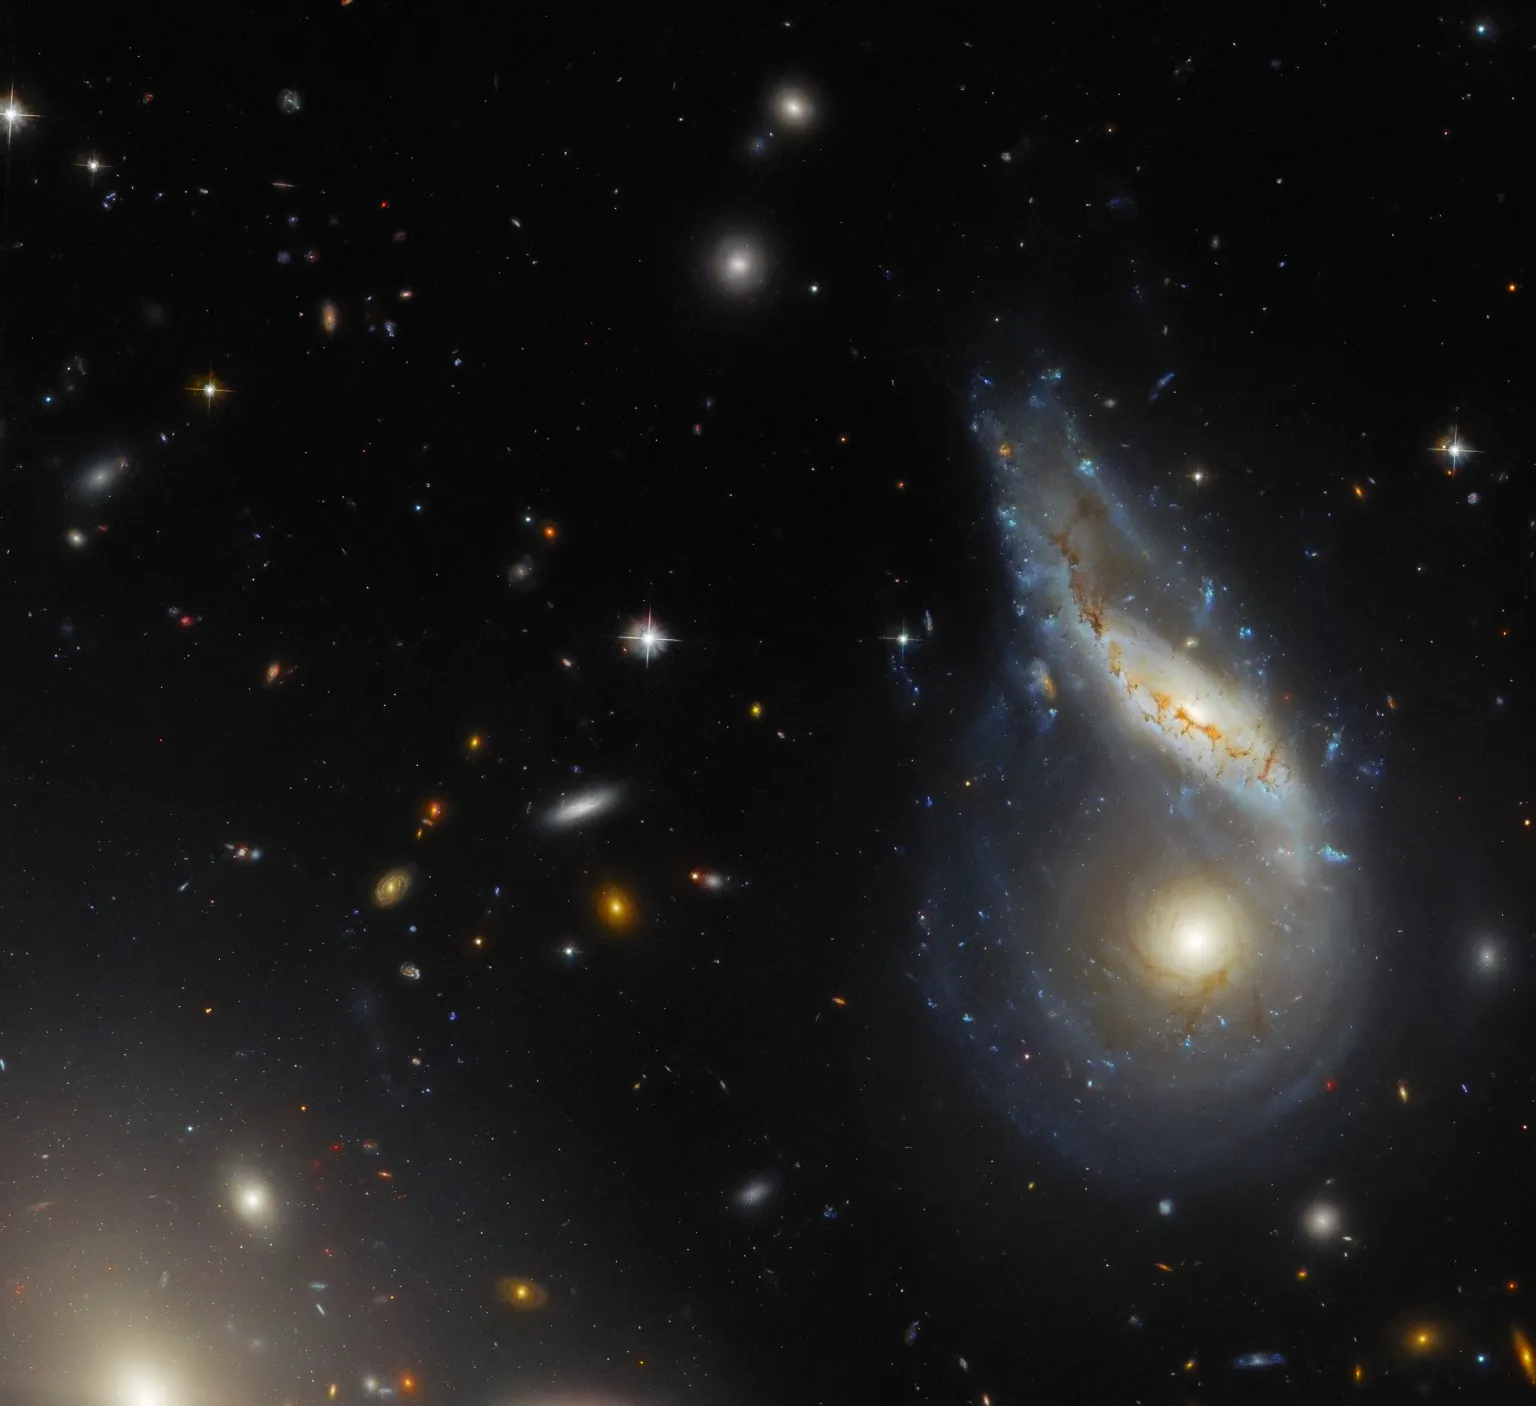 This strange galaxy is actually two galaxies, and they are about to collide